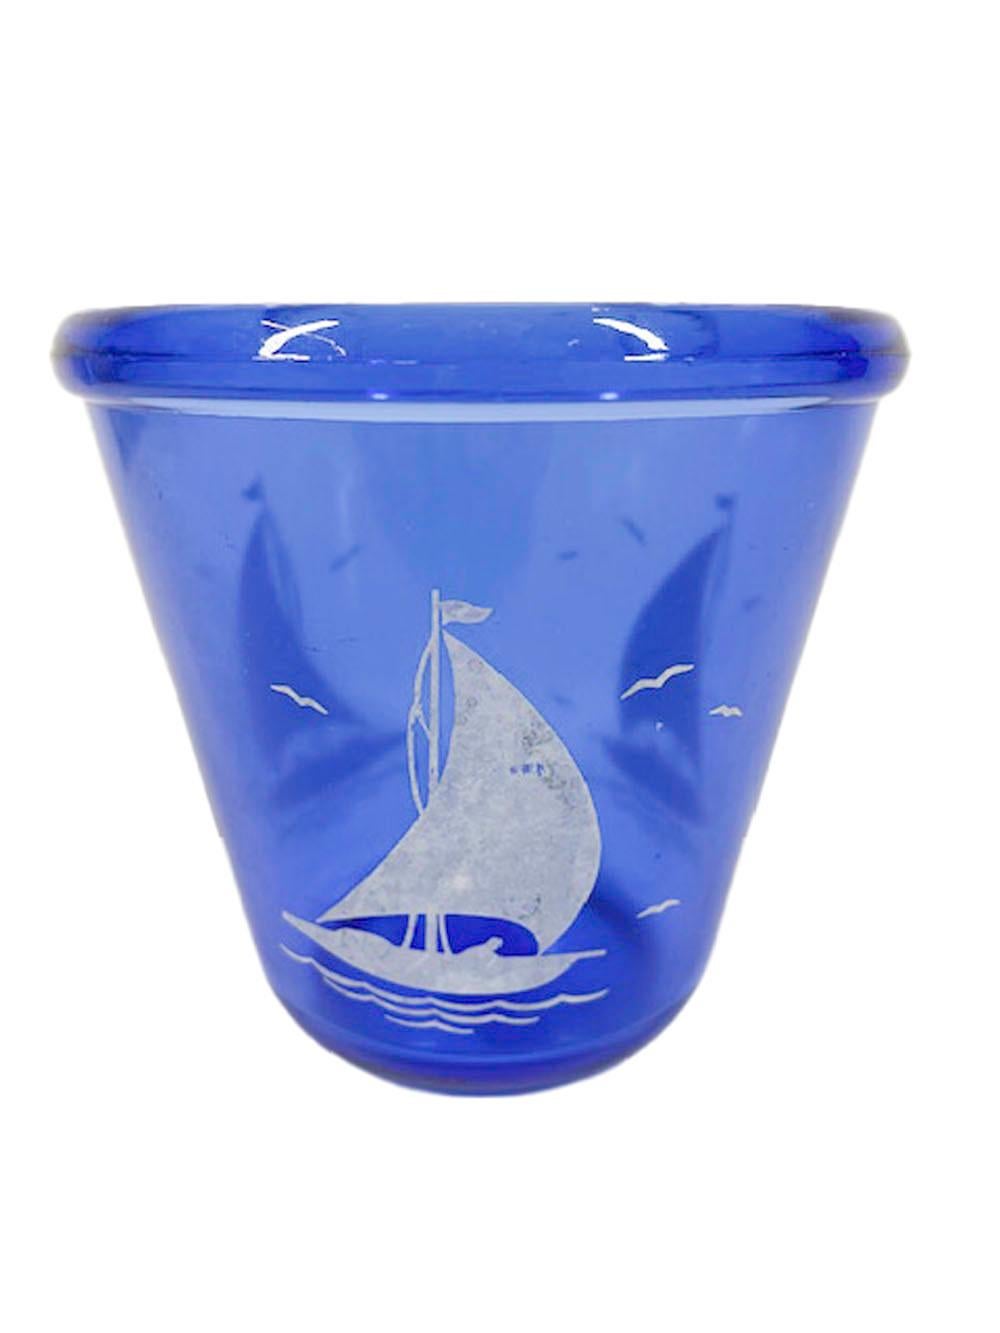 Art Deco ice bowl of tapered form with rolled rim, from Hazel-Atlas' Sportsman Series in cobalt glass with white sail boats.